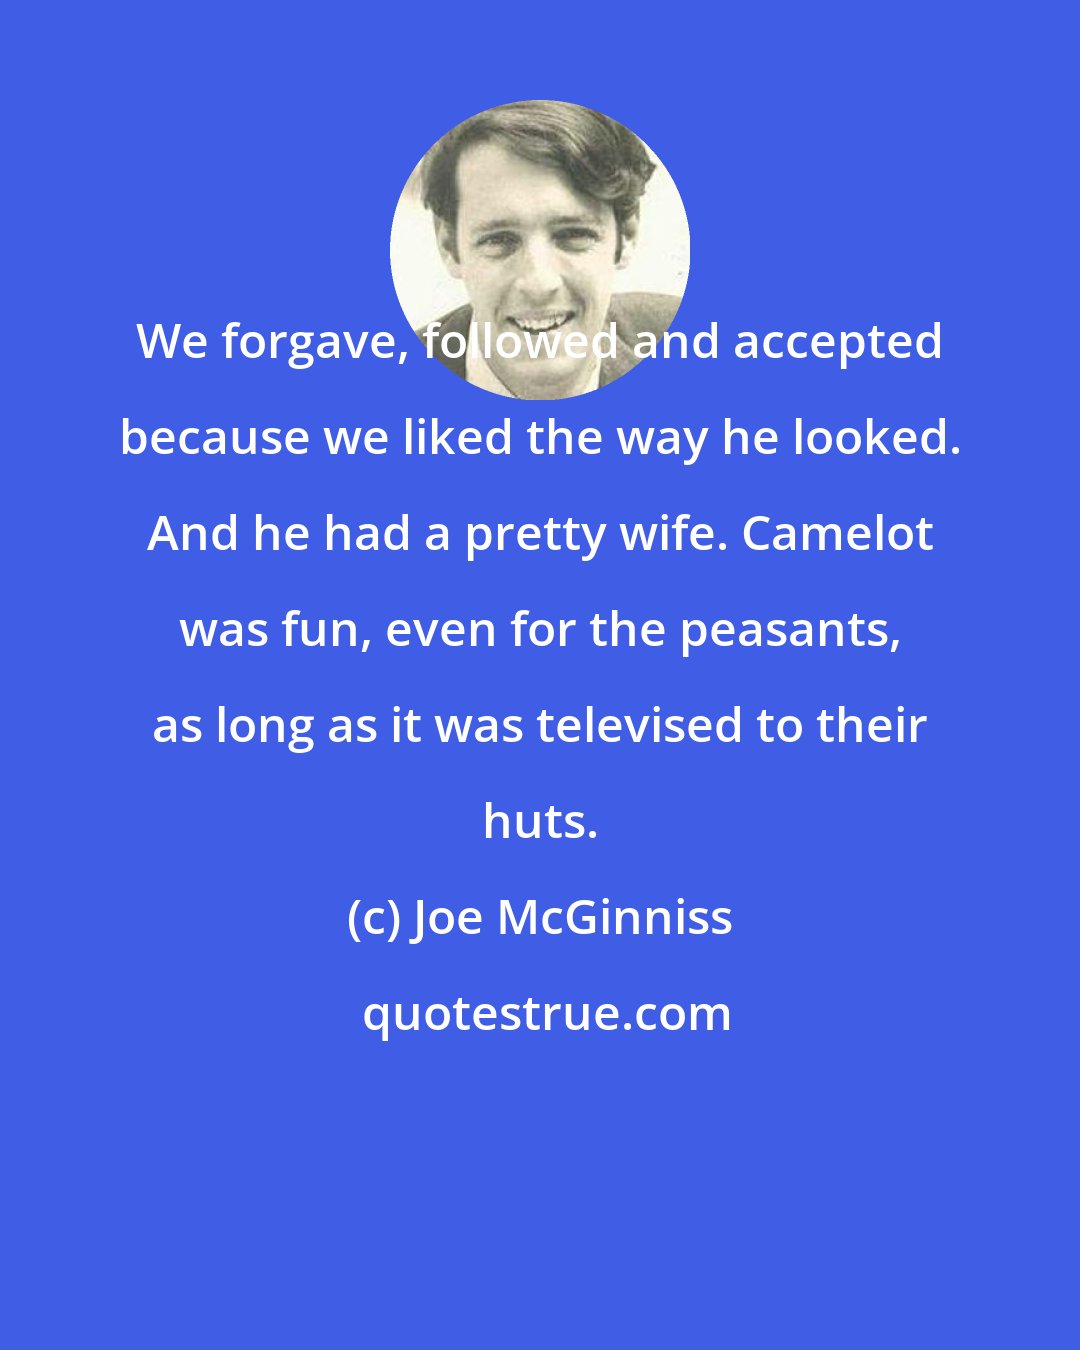 Joe McGinniss: We forgave, followed and accepted because we liked the way he looked. And he had a pretty wife. Camelot was fun, even for the peasants, as long as it was televised to their huts.